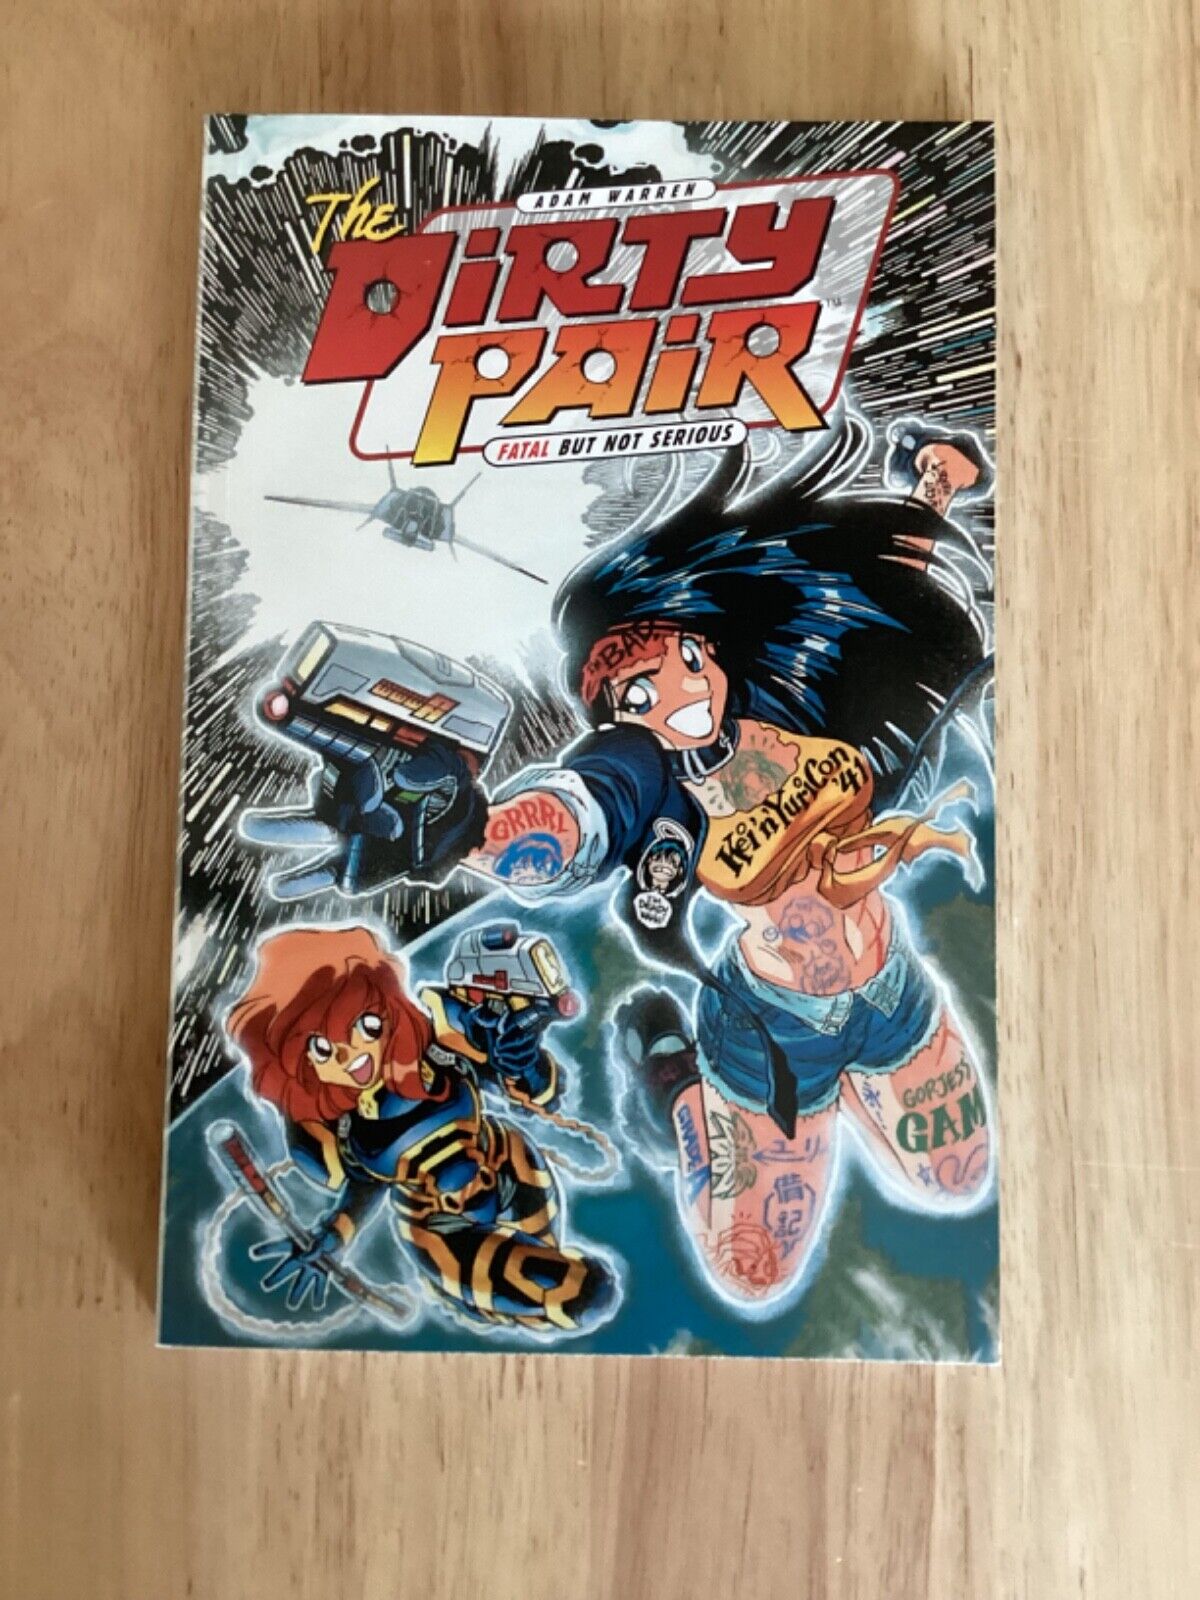 The Dirty Pair: Fatal but not Serious TPB very good condition